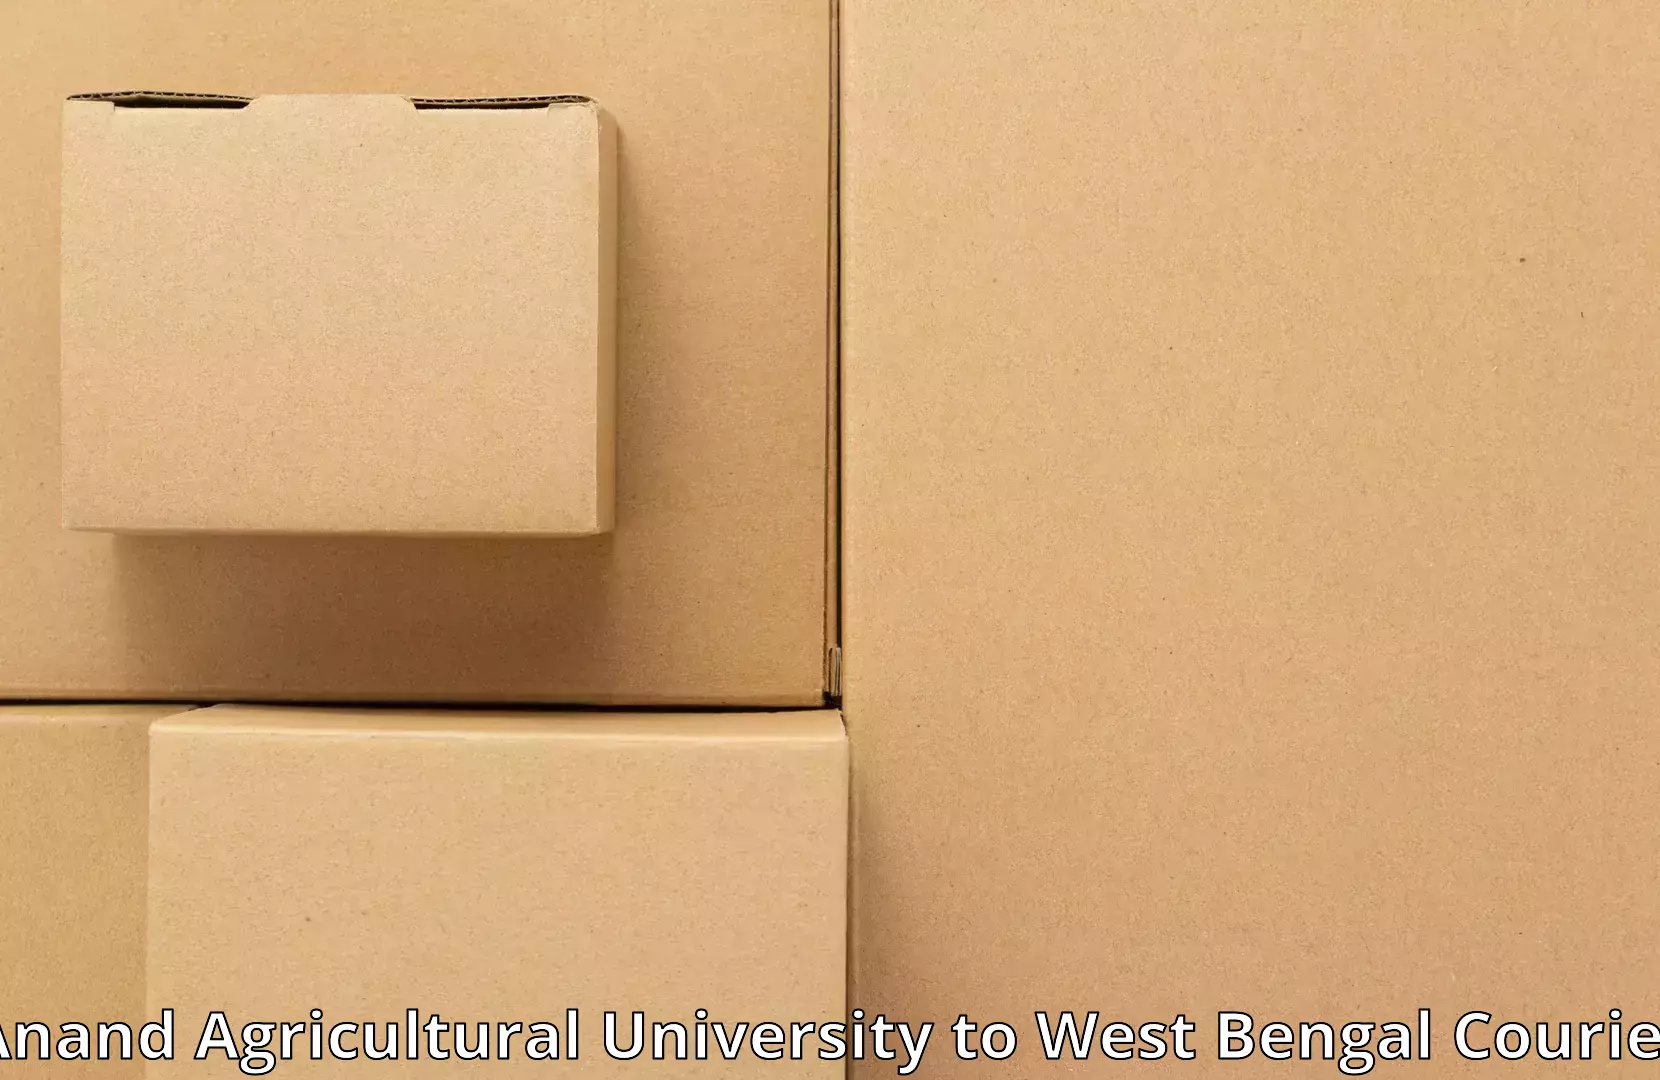 Furniture moving service Anand Agricultural University to Cossipore